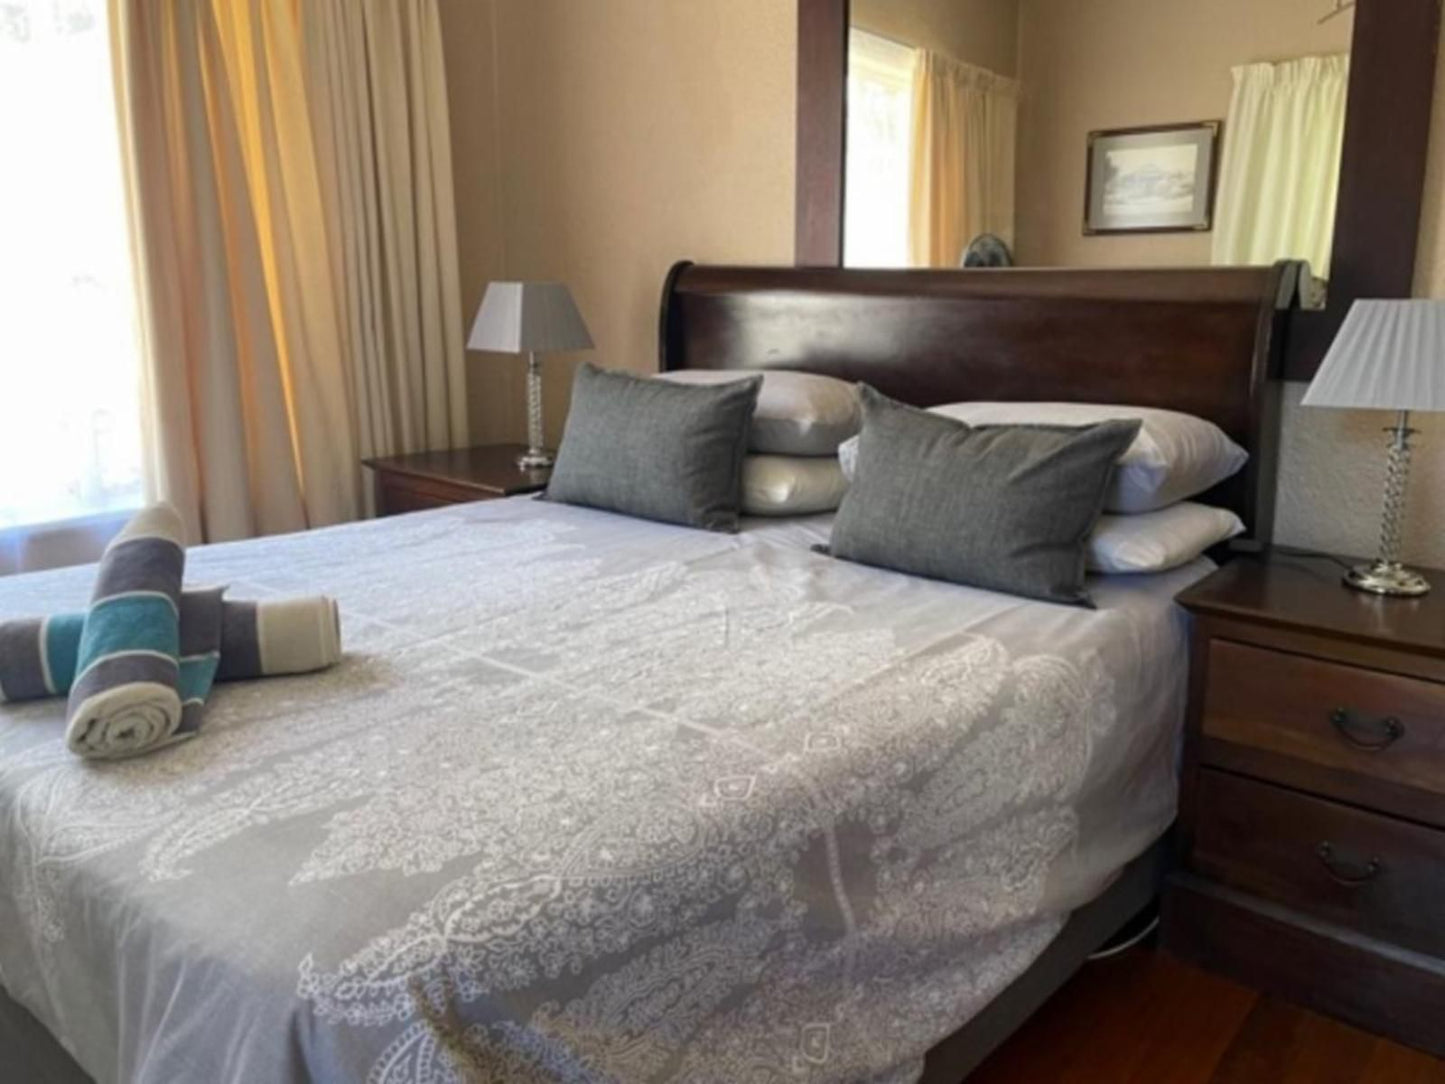 Authentic Newlands Newlands Cape Town Western Cape South Africa Bedroom